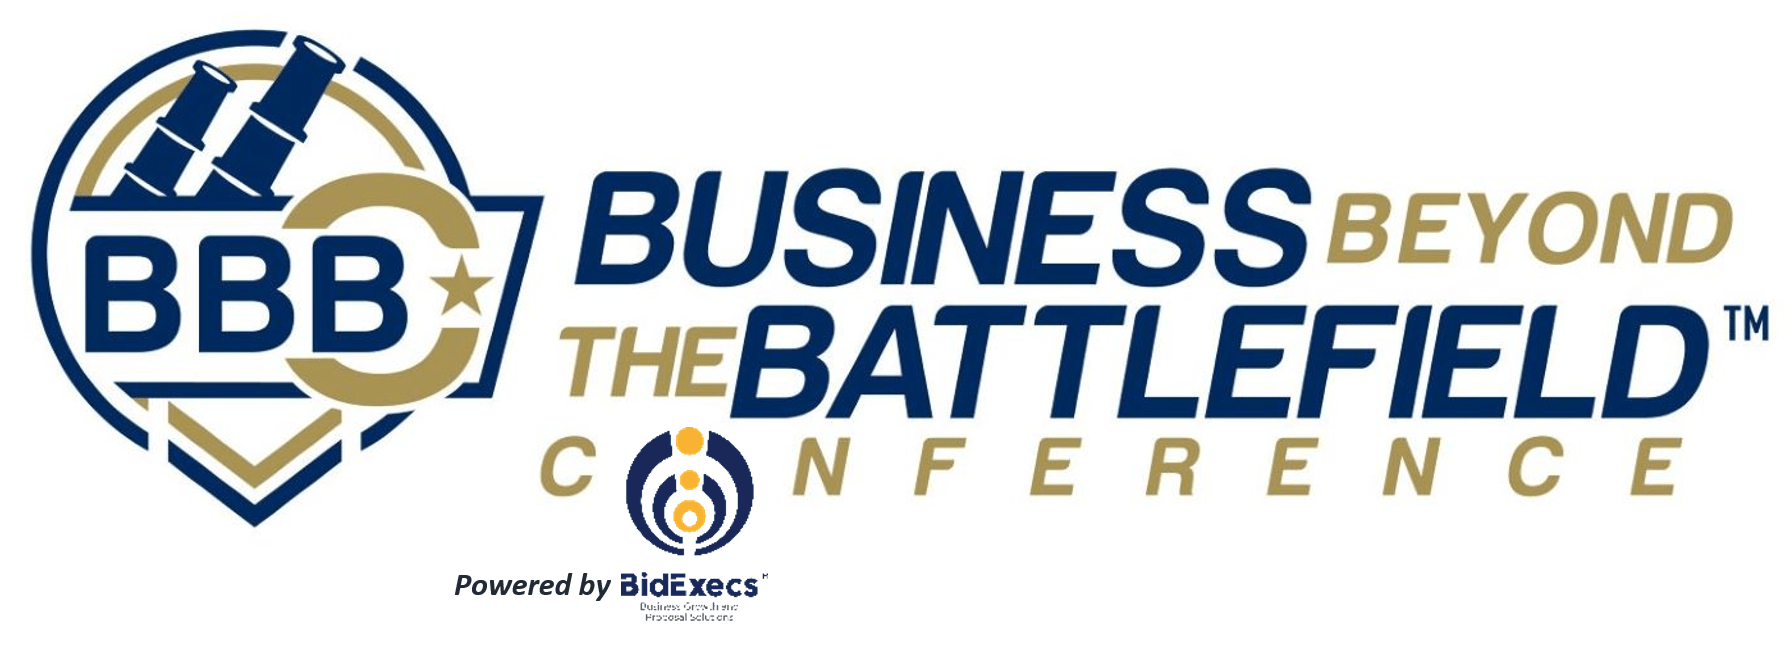 Logo of Business Beyond the Battlefield Conference." _languageinserted="true